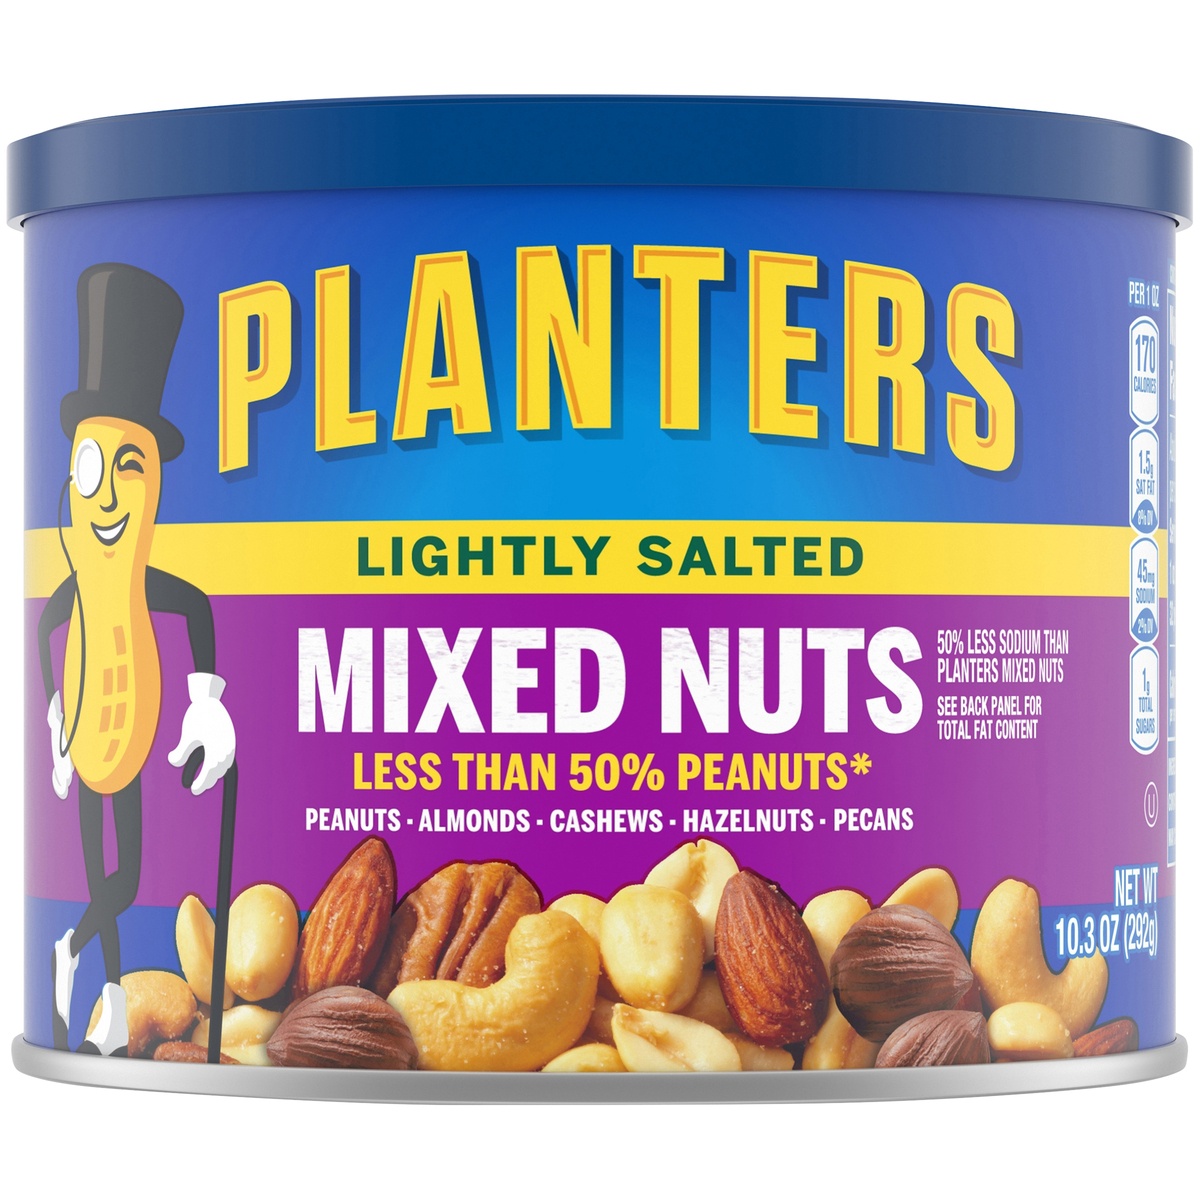 slide 9 of 11, Planters Lightly Salted Deluxe Mixed Nuts,Canister, 10.3 oz